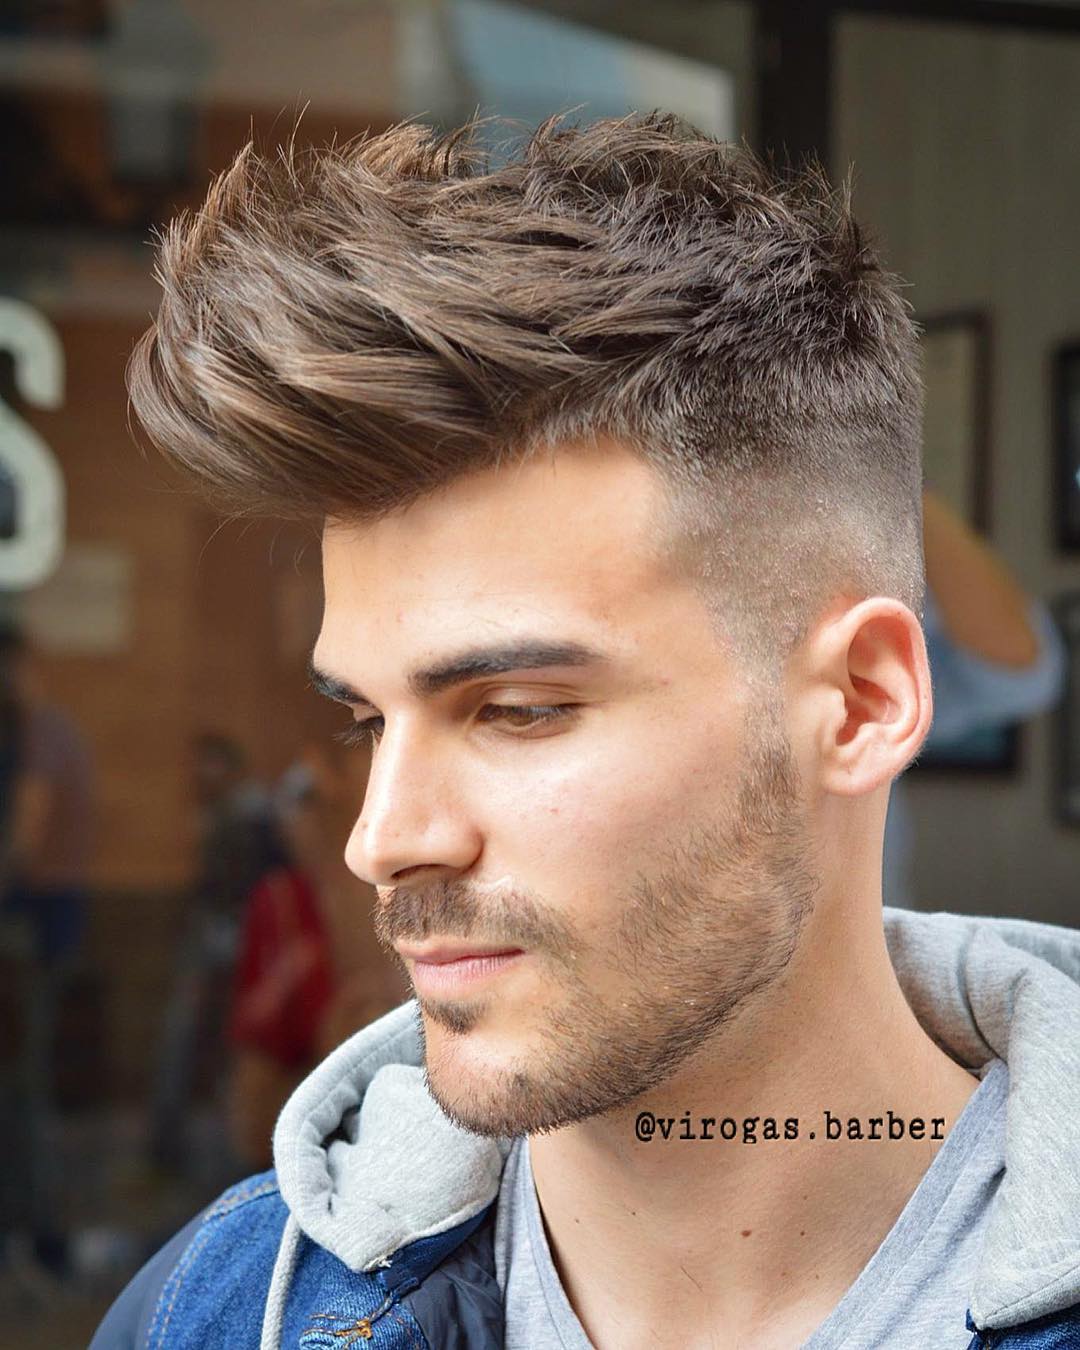 Best Hairstyles for Men: Spikes